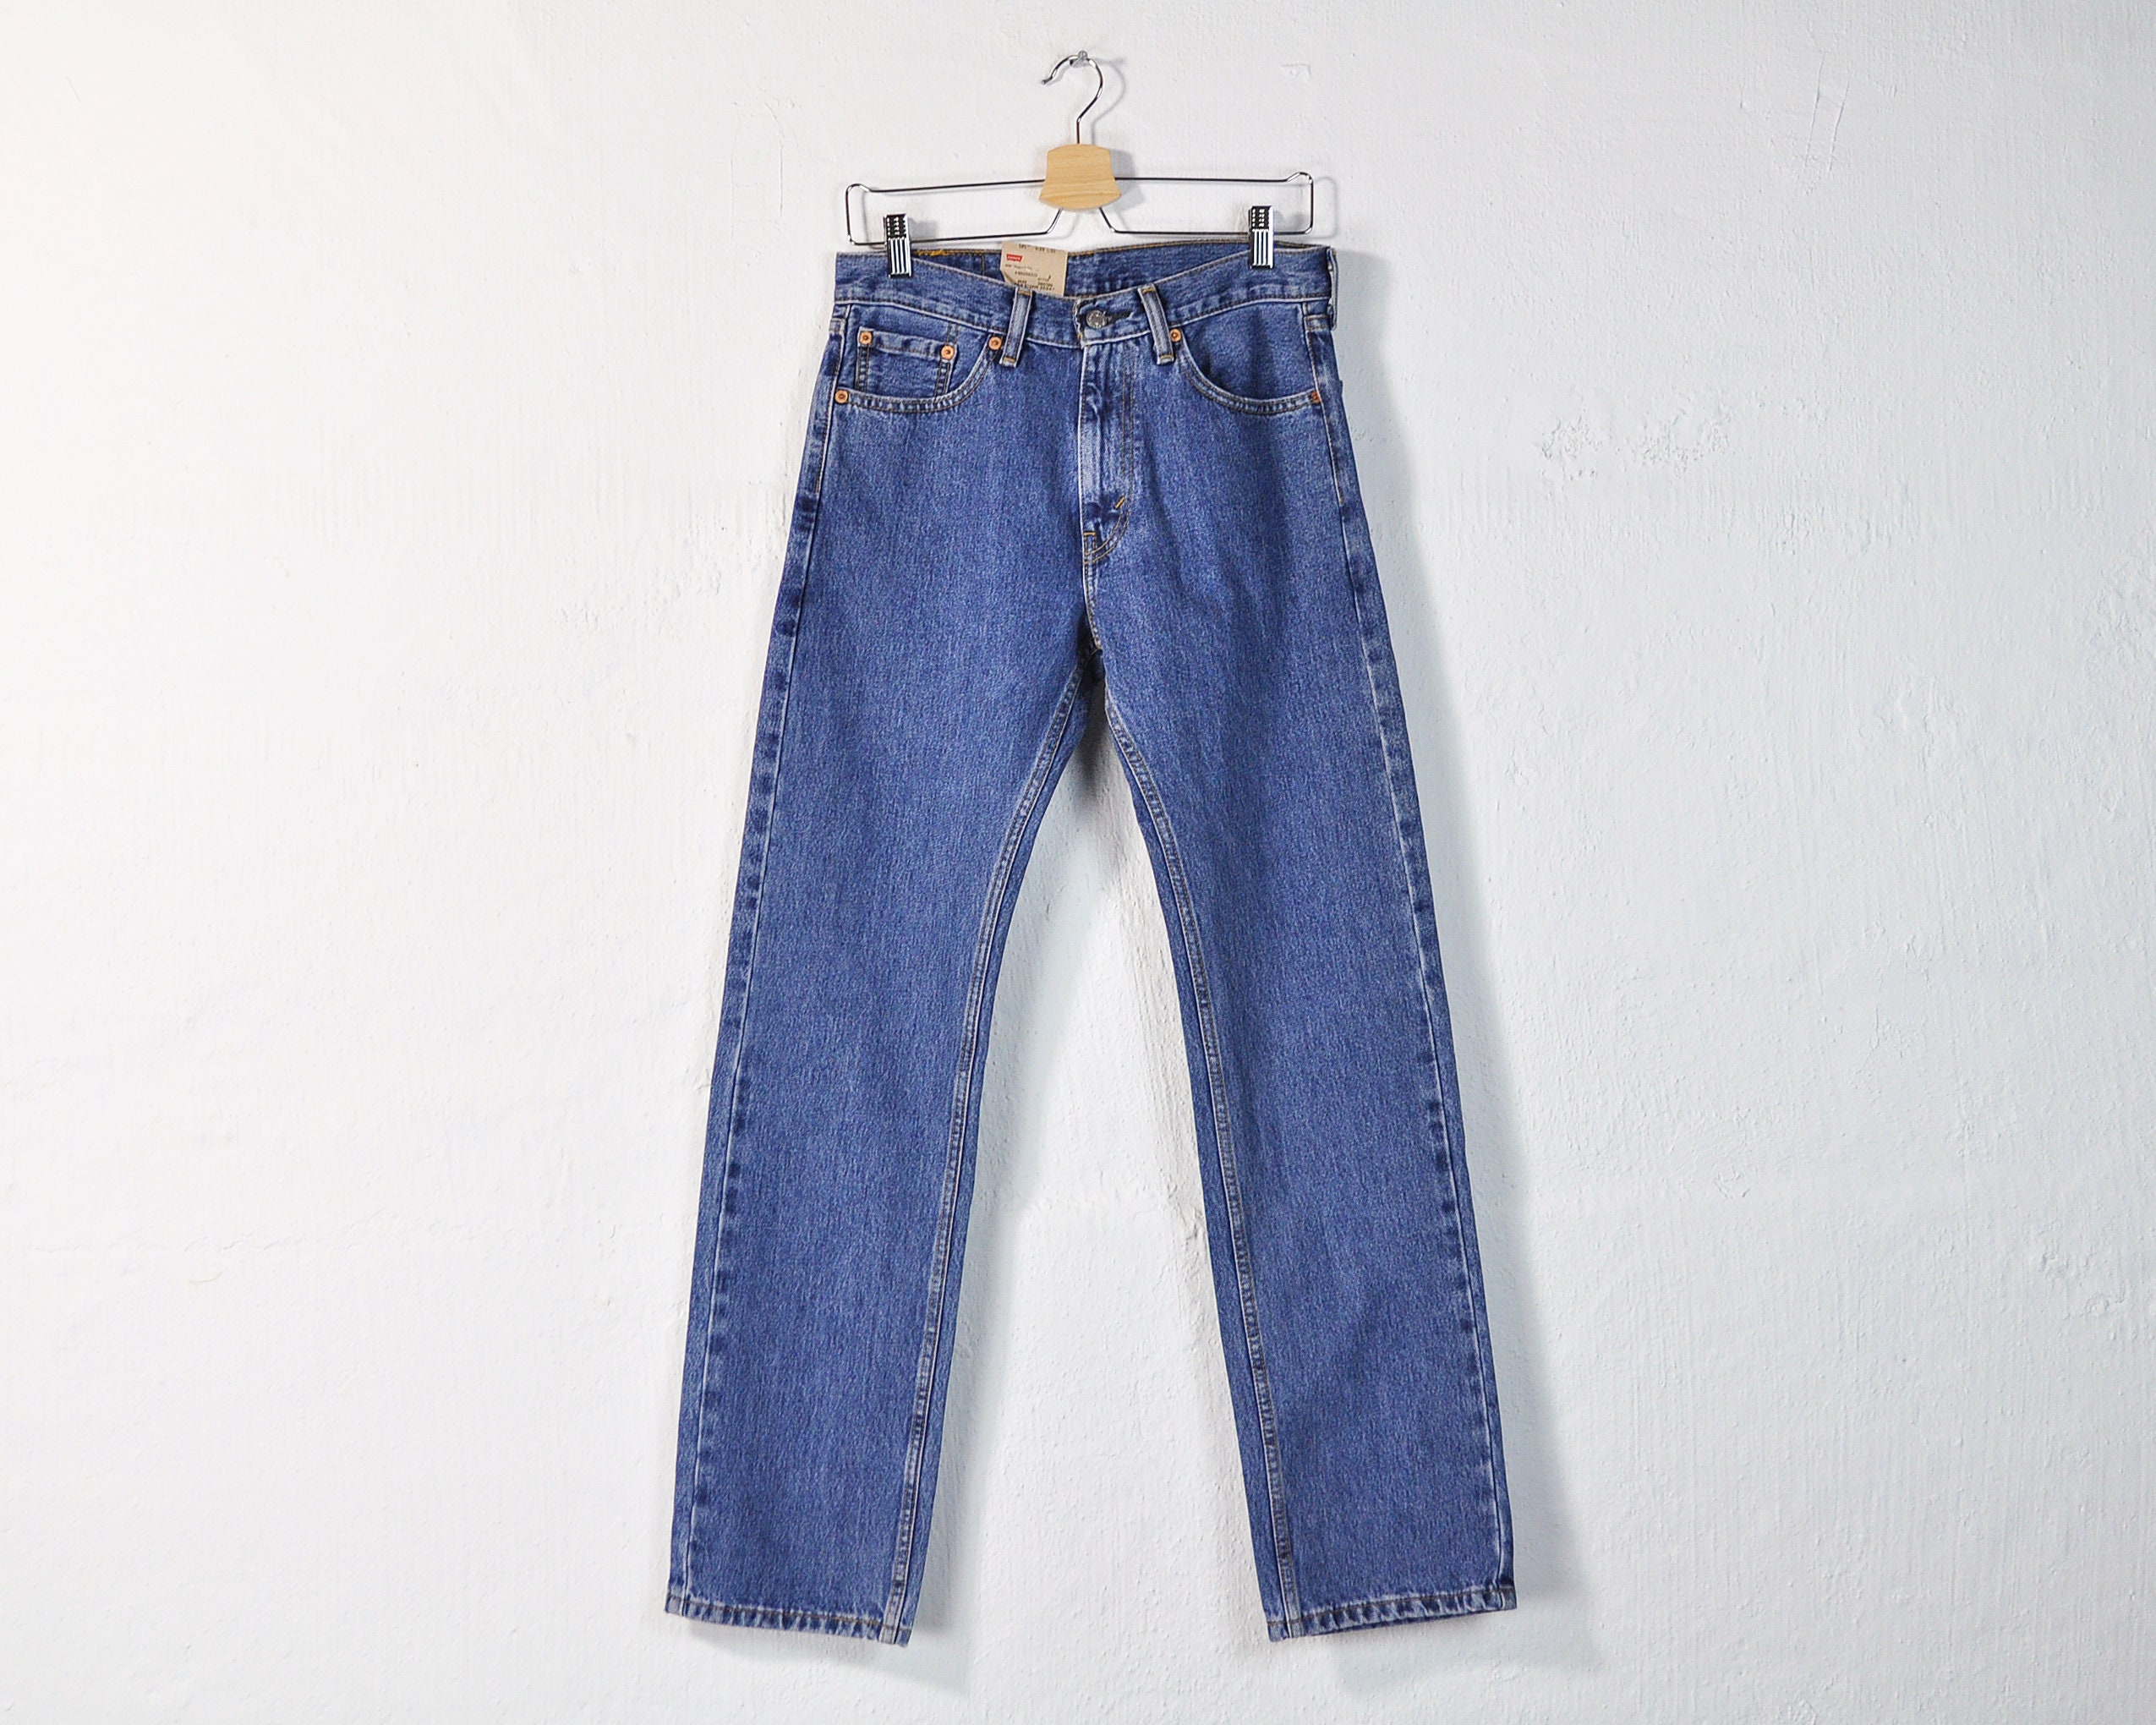 Levi’s Vintage Jean 550 W 29 L 29 Mom Jeans Relaxed Fit Bleu Made in Mexico Donna Vestiti Jeans Jeans boyfriend Levi's Jeans boyfriend 